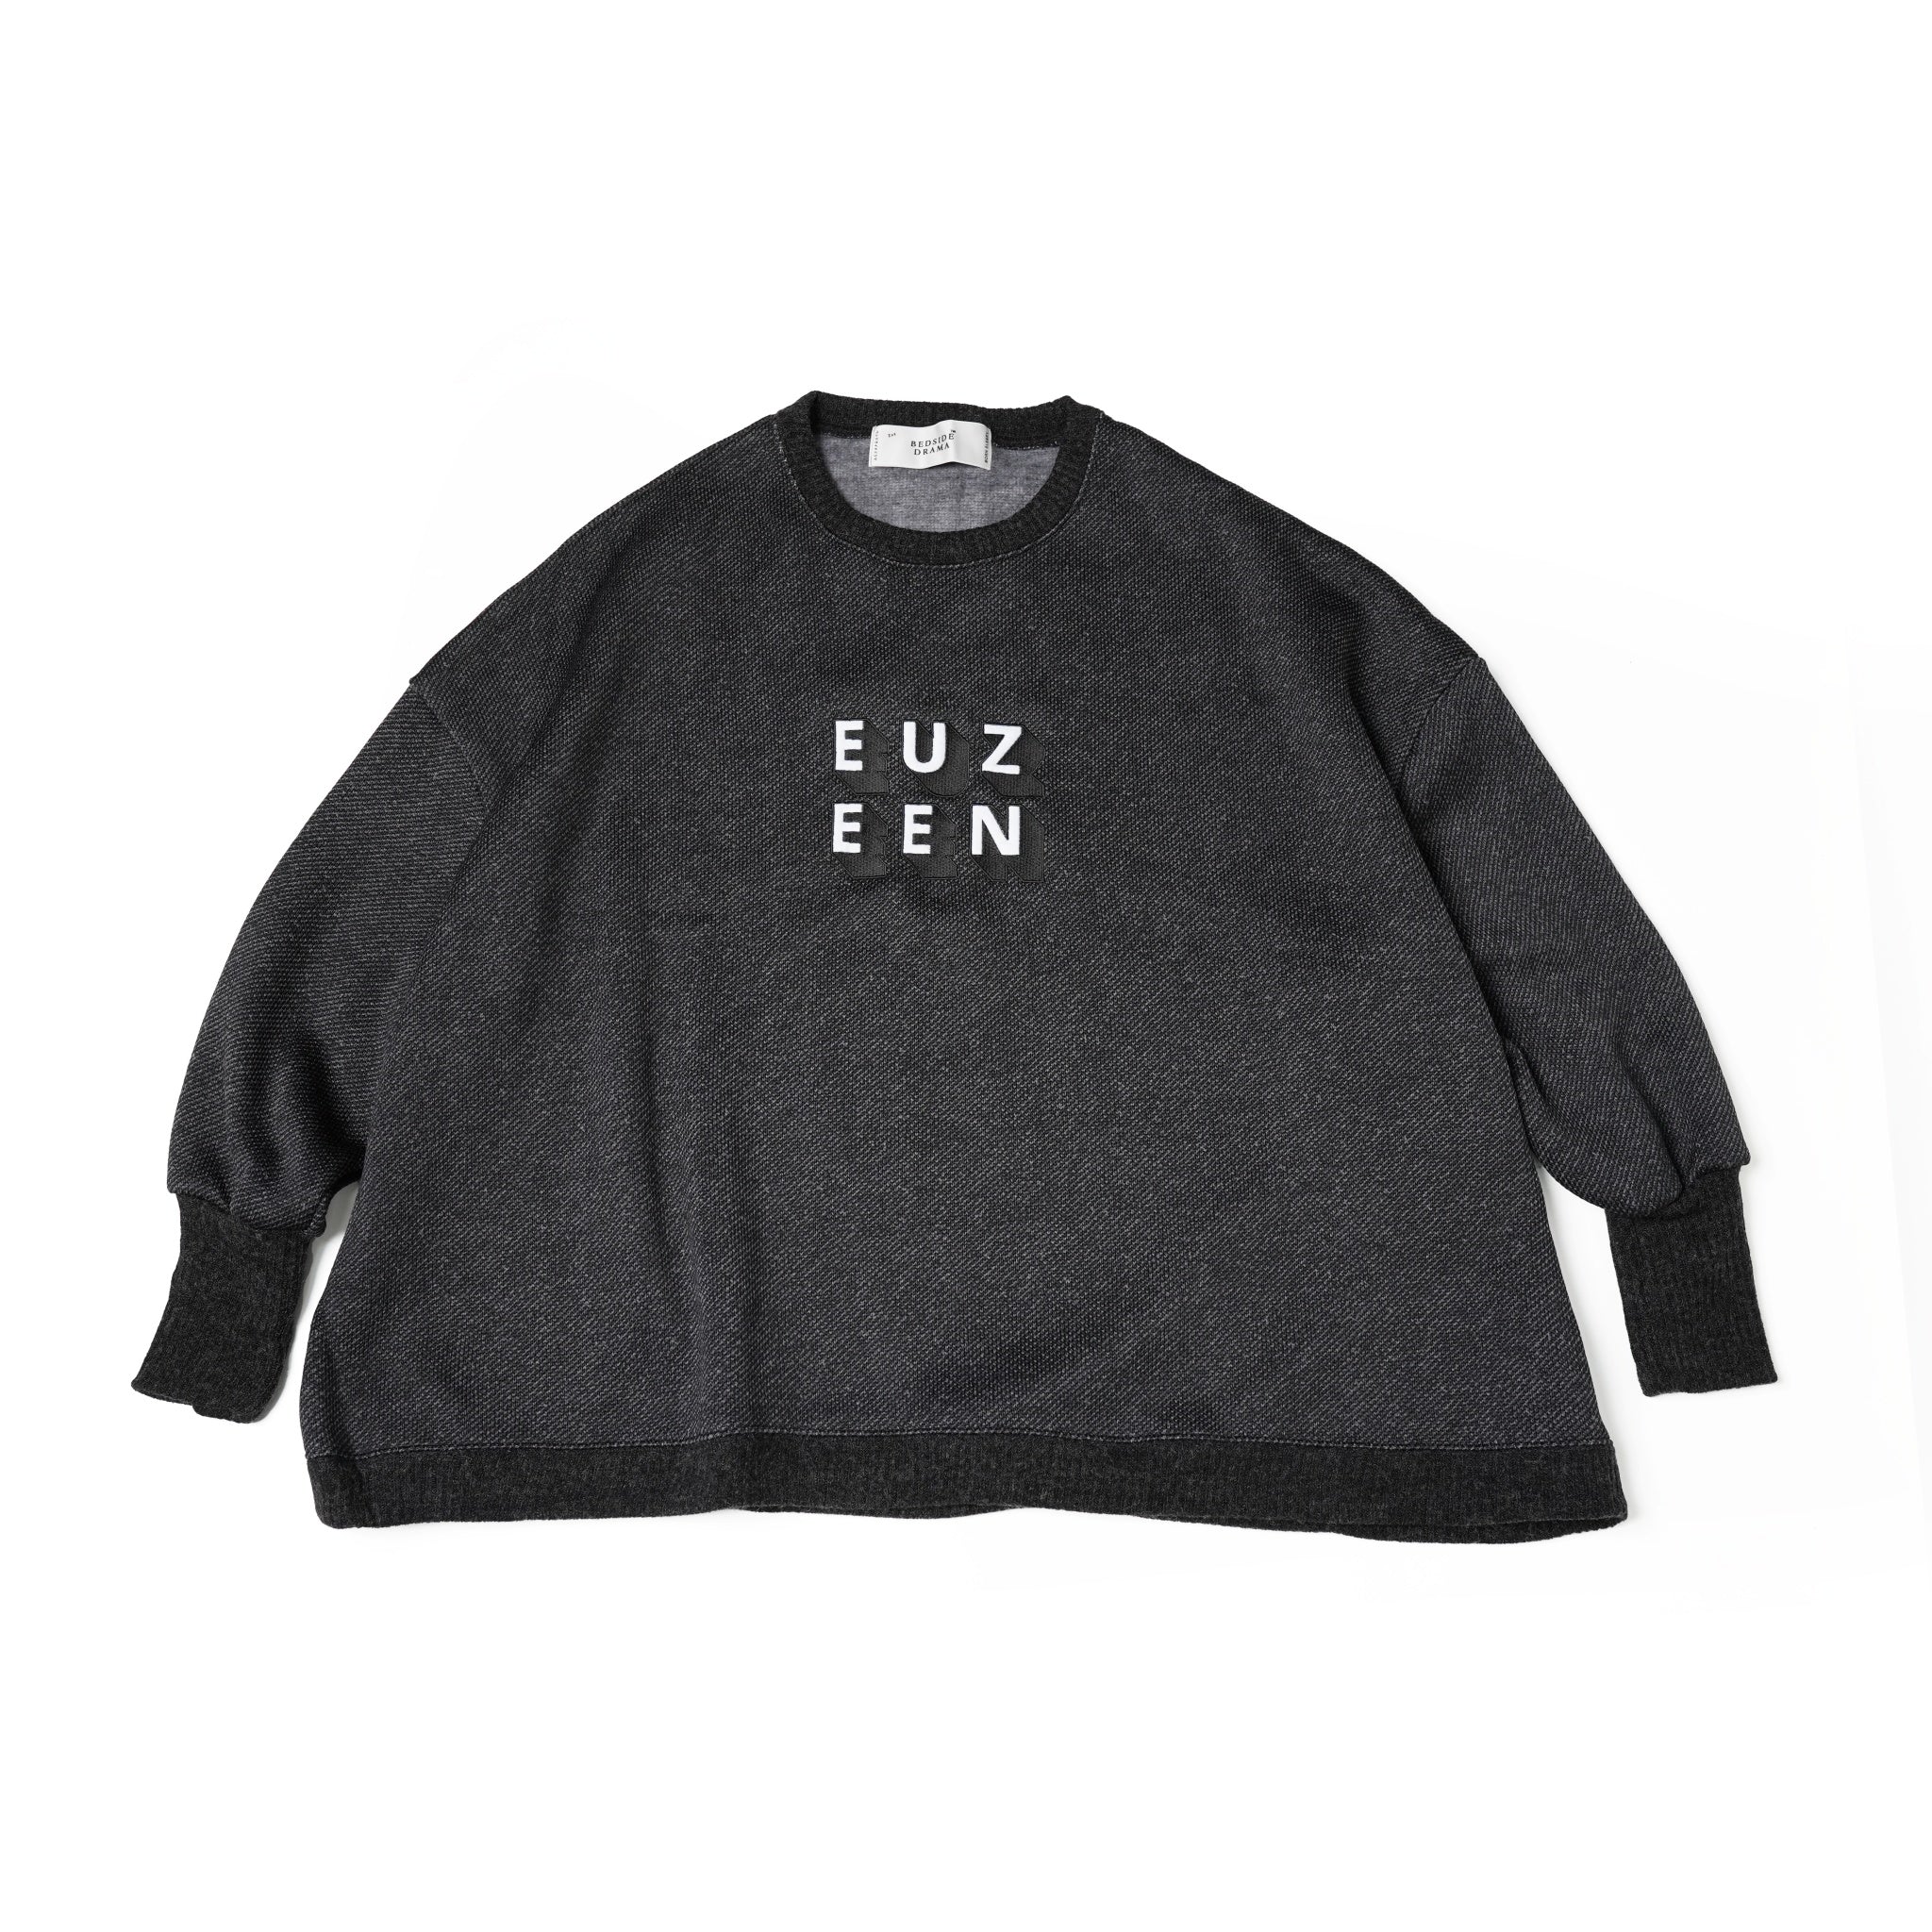 No:bsd23AW-28Cb | Name:Home Sweater Pullover/EUZEEN | Color:Black【BEDSIDEDRAMA_ベッドサイドドラマ】